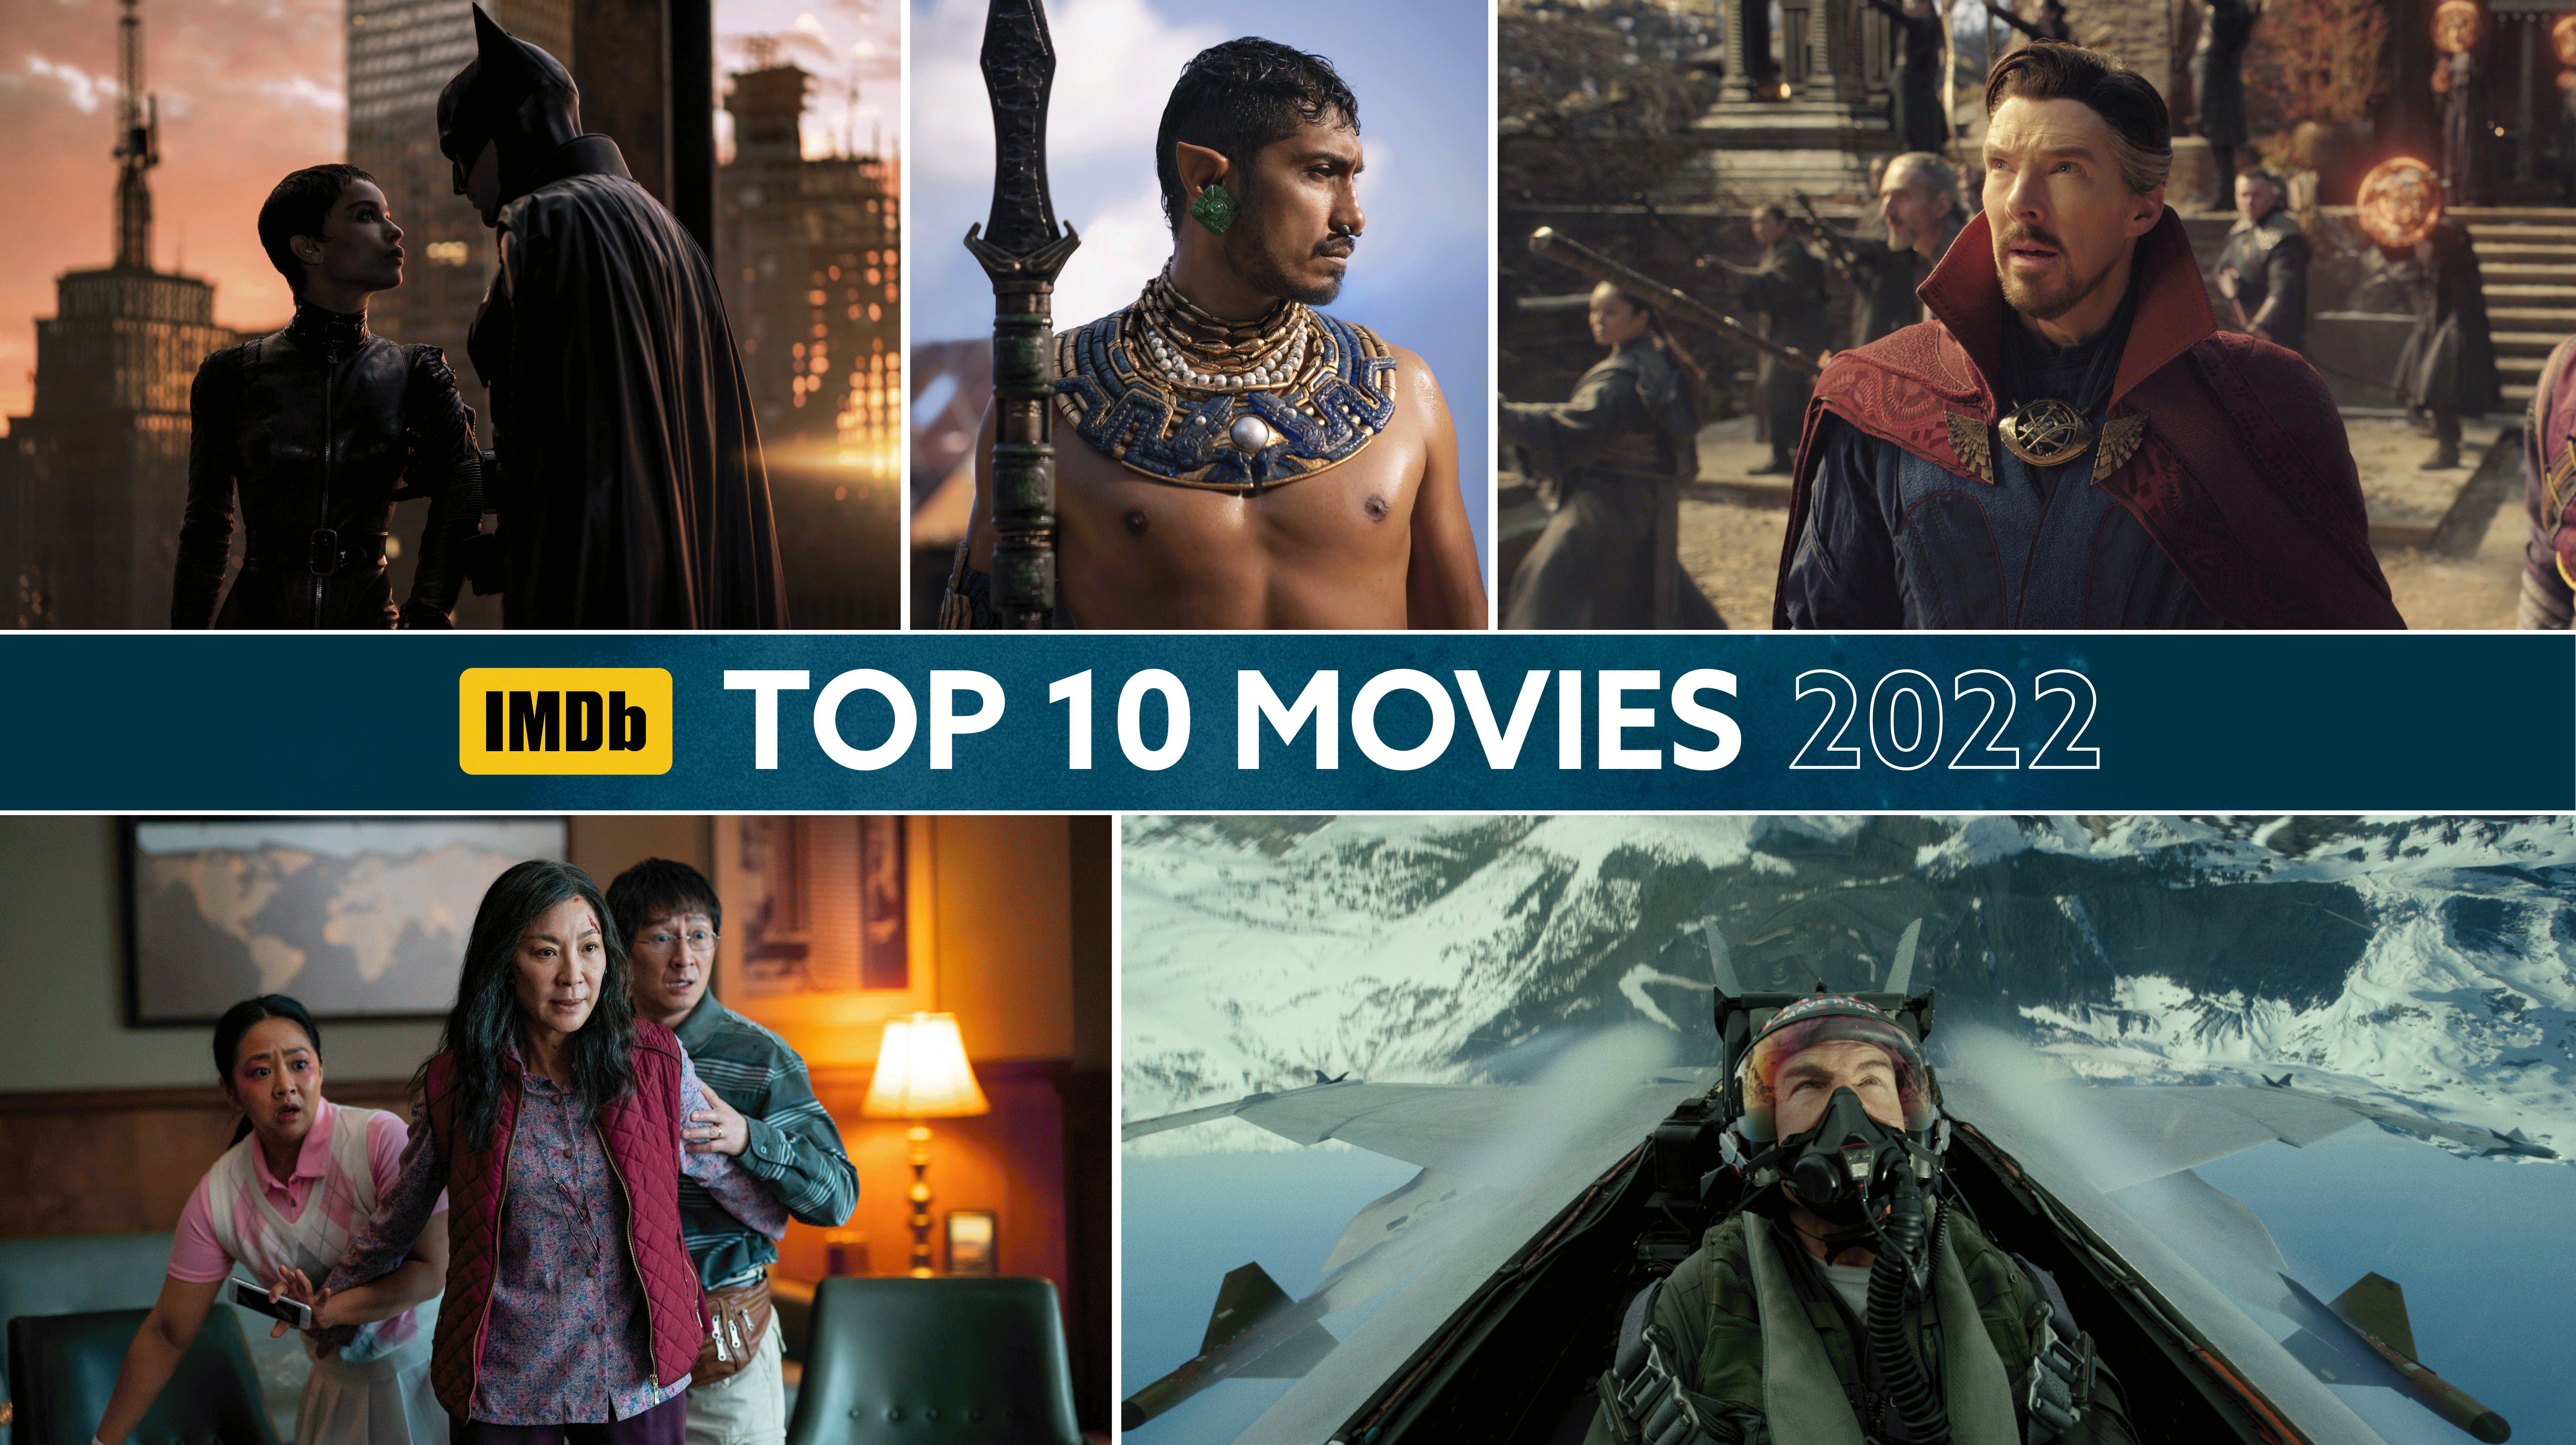 IMDb Announces Top 10 Movies and Series of 2022